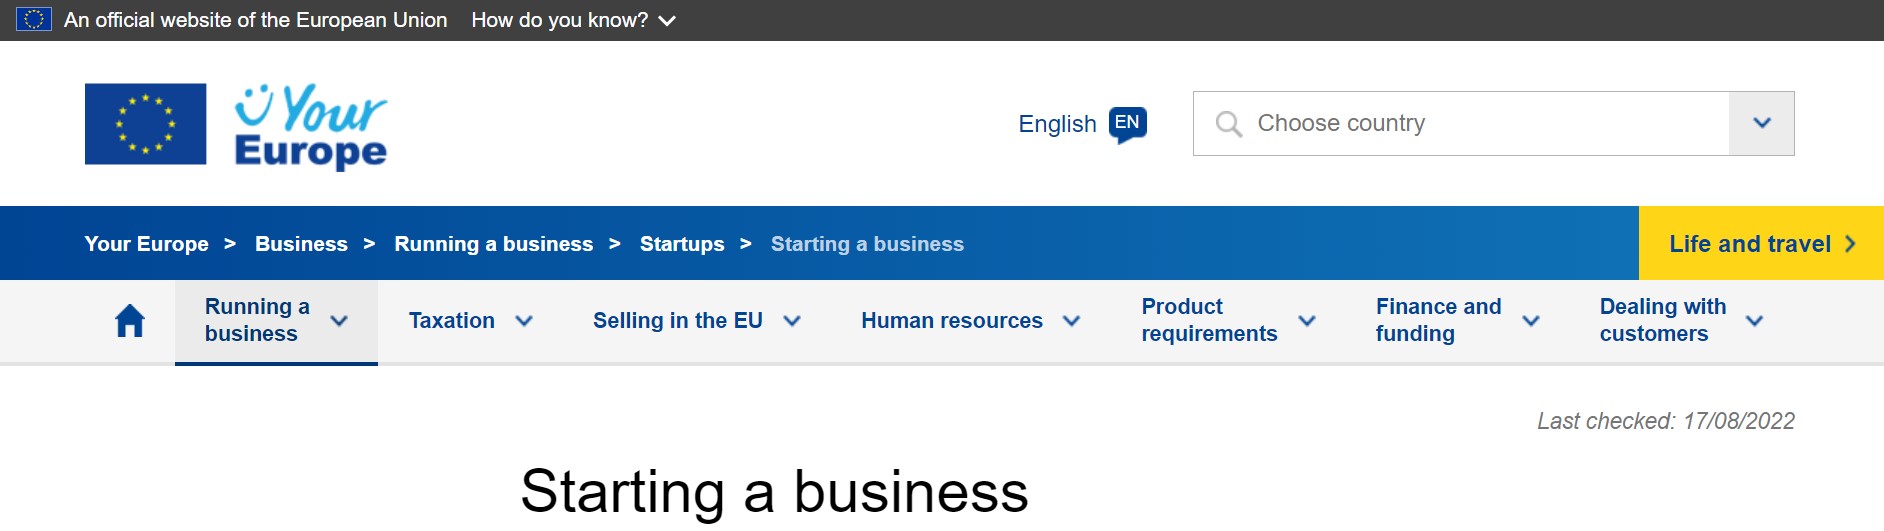 How to start an e-commerce business and register it in the EU